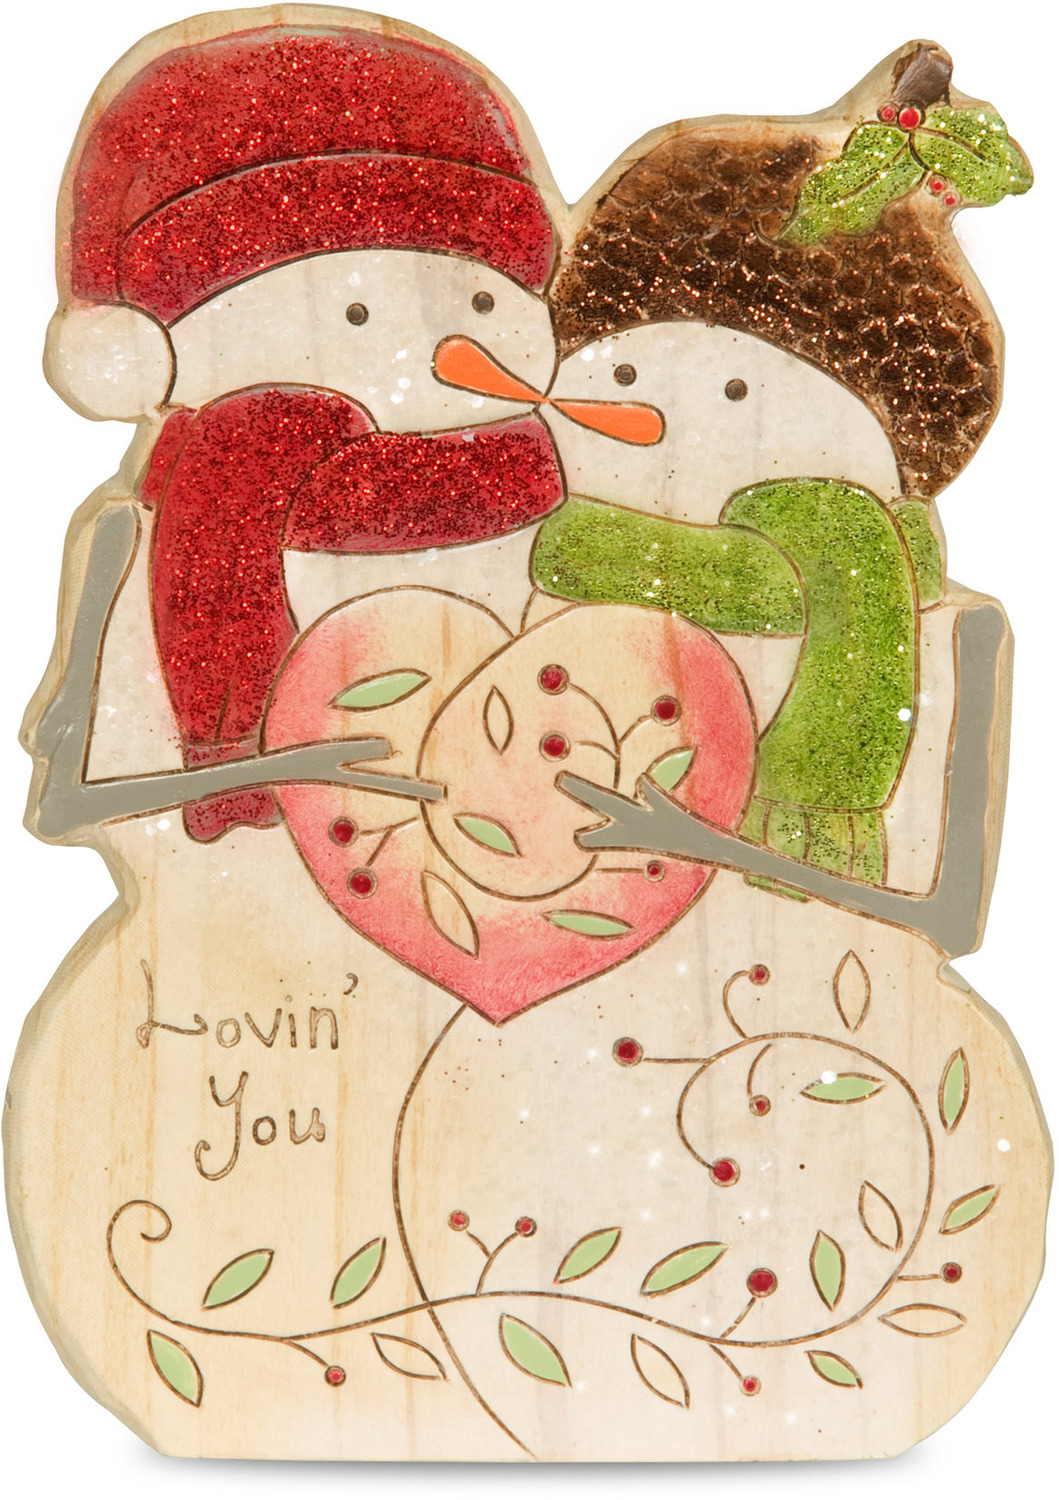 Lovin' You by Heavenly Winter Woods - Lovin' You - 5" Painted Snowman Couple Figurine/Carving